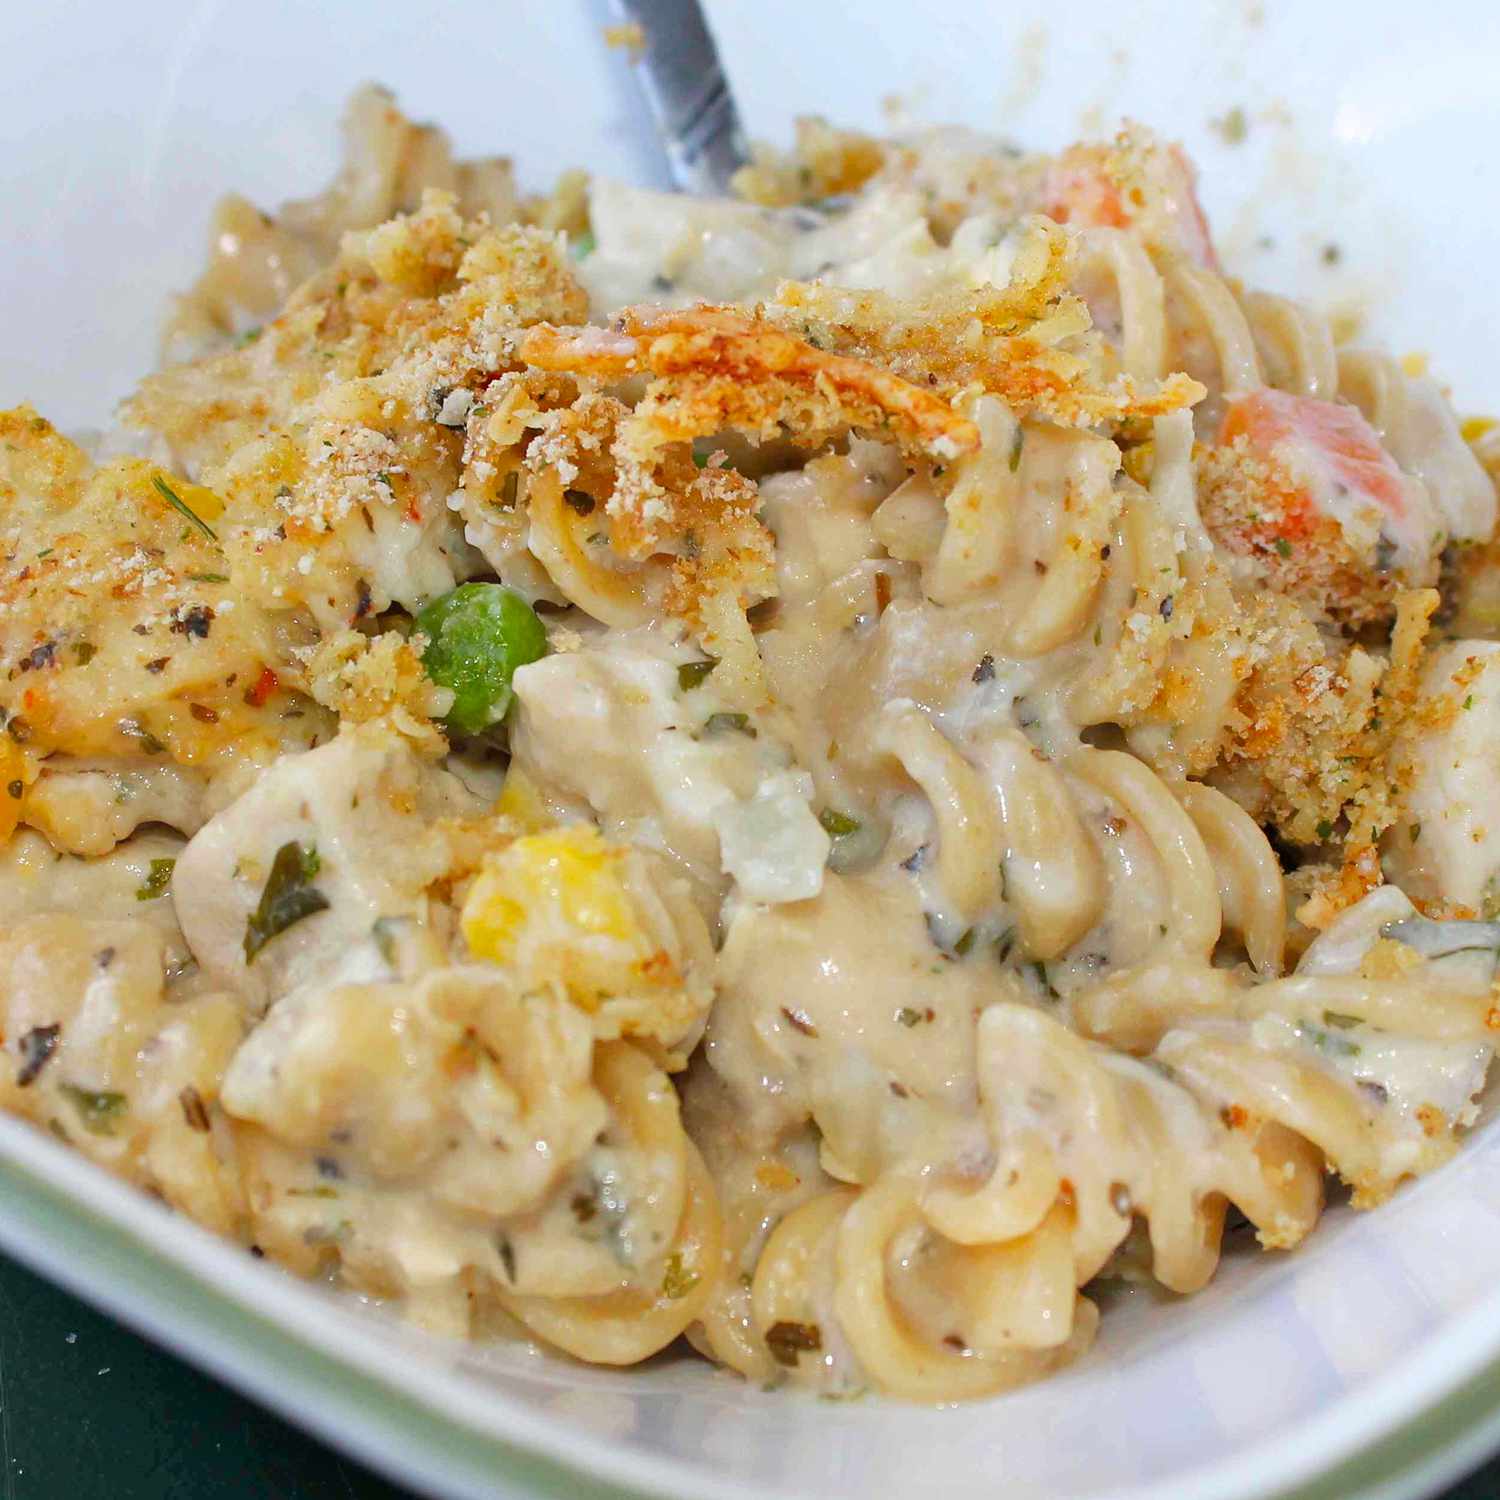 Delicious Chicken and Pasta Casserole with Mixed Vegetables: Easy Recipe and Tips